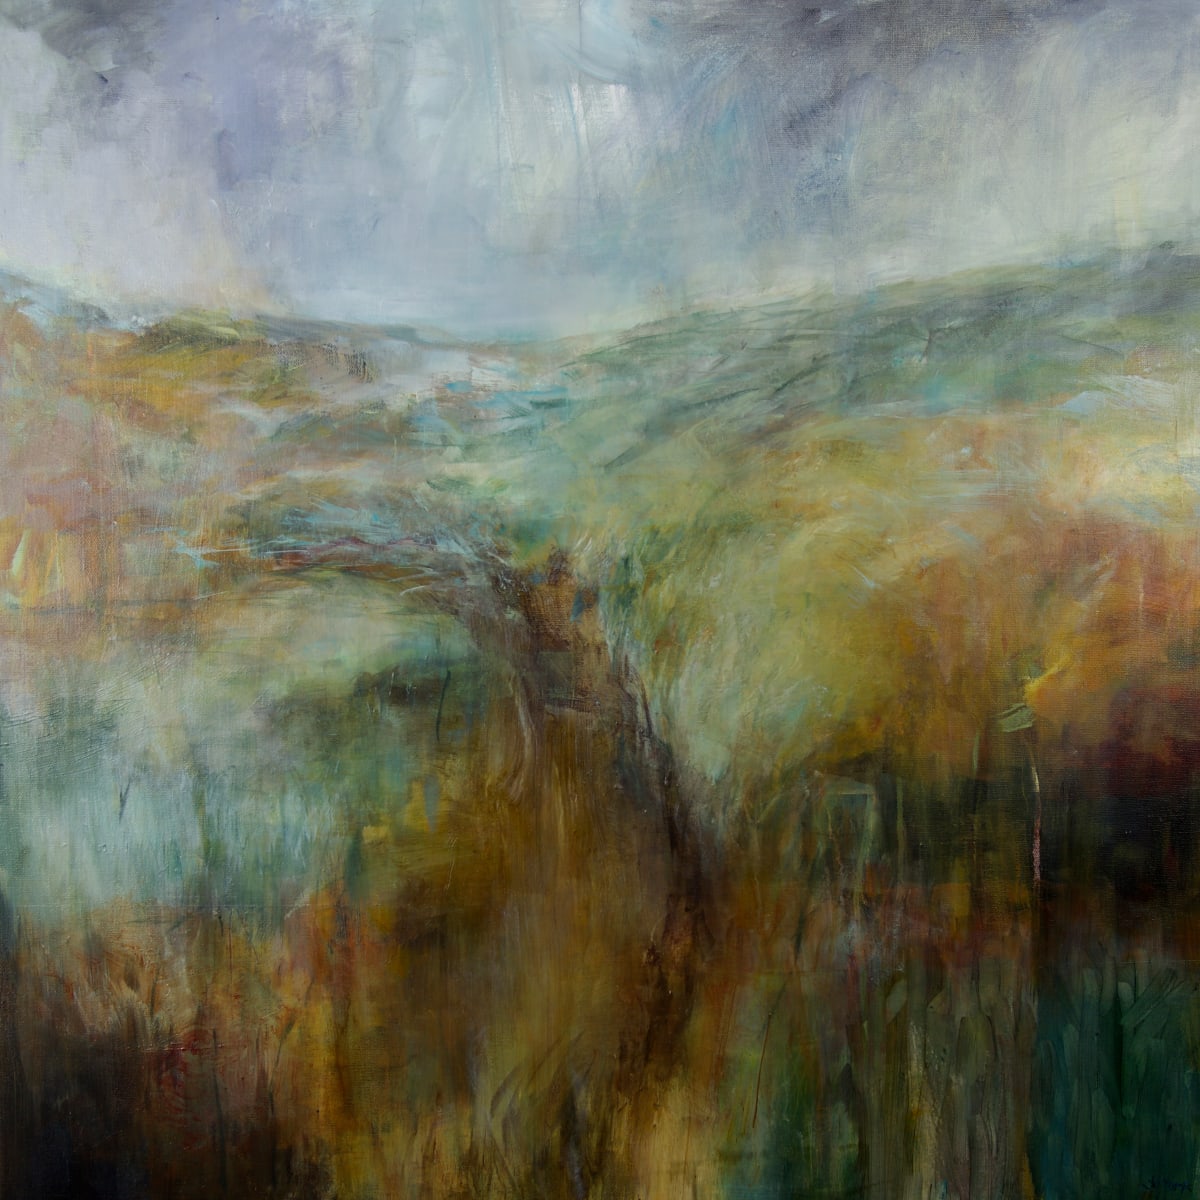 Aftermath by Jo York  Image: Aftermath is an atmospheric painting, and a personal response to bright warm light after a downpour of rain.